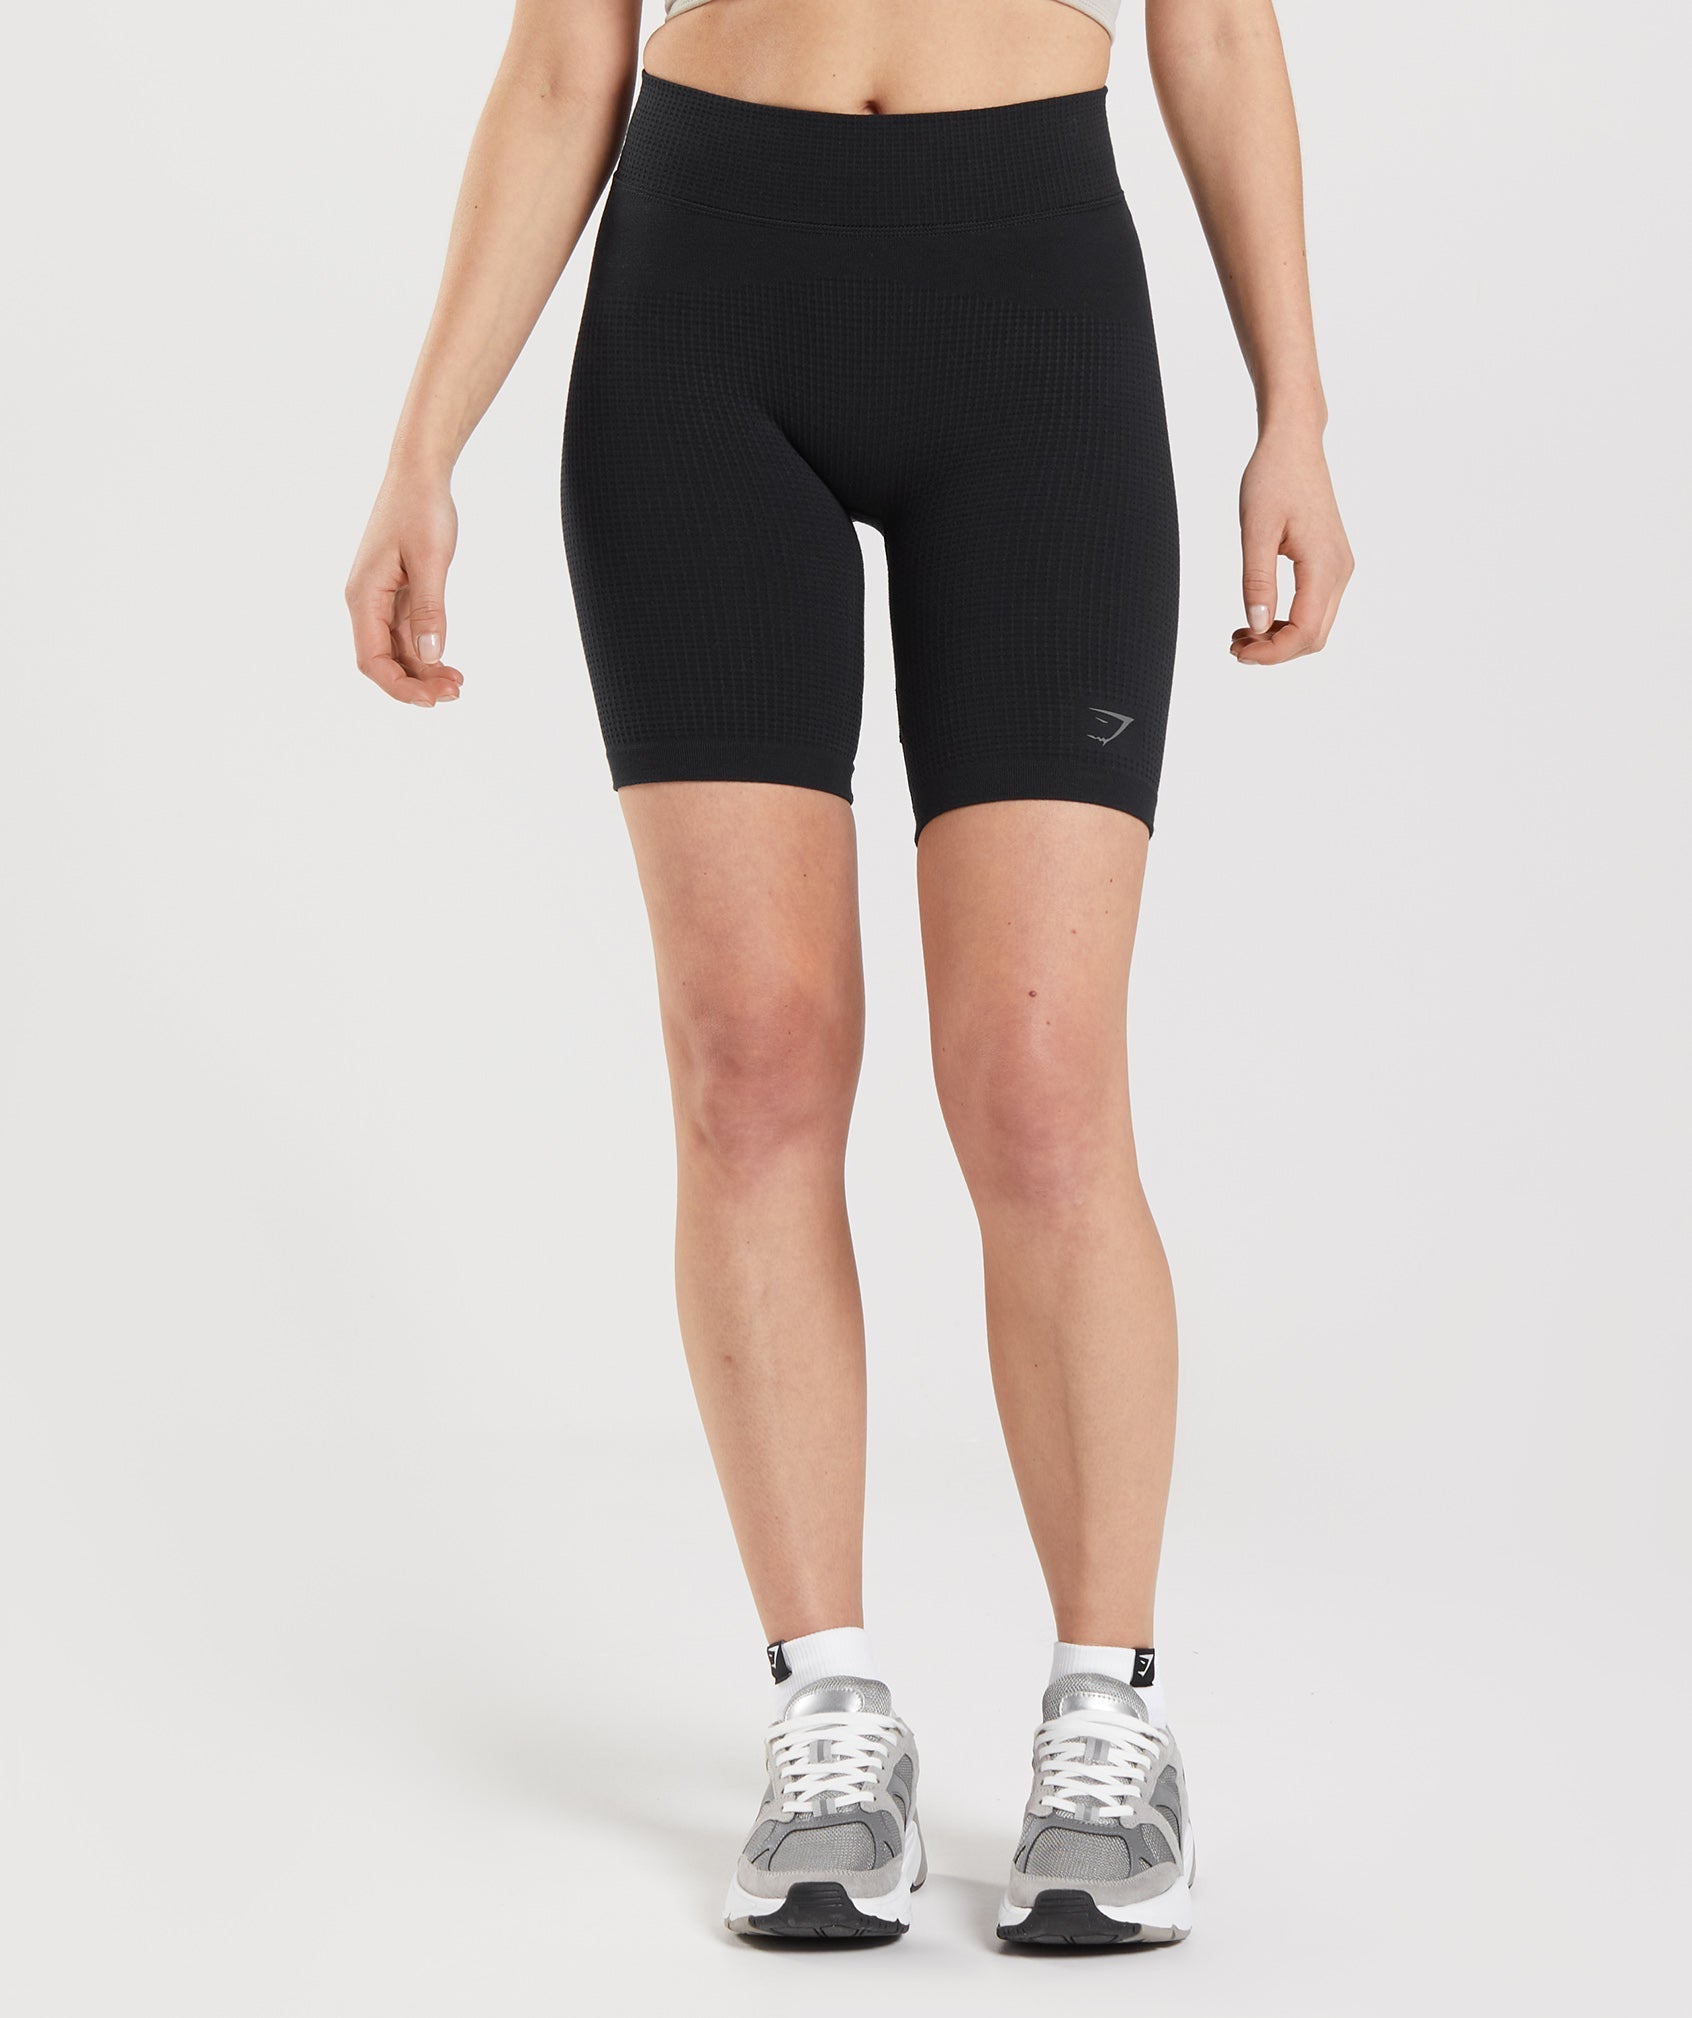 Pause Seamless Cycling Shorts in Black